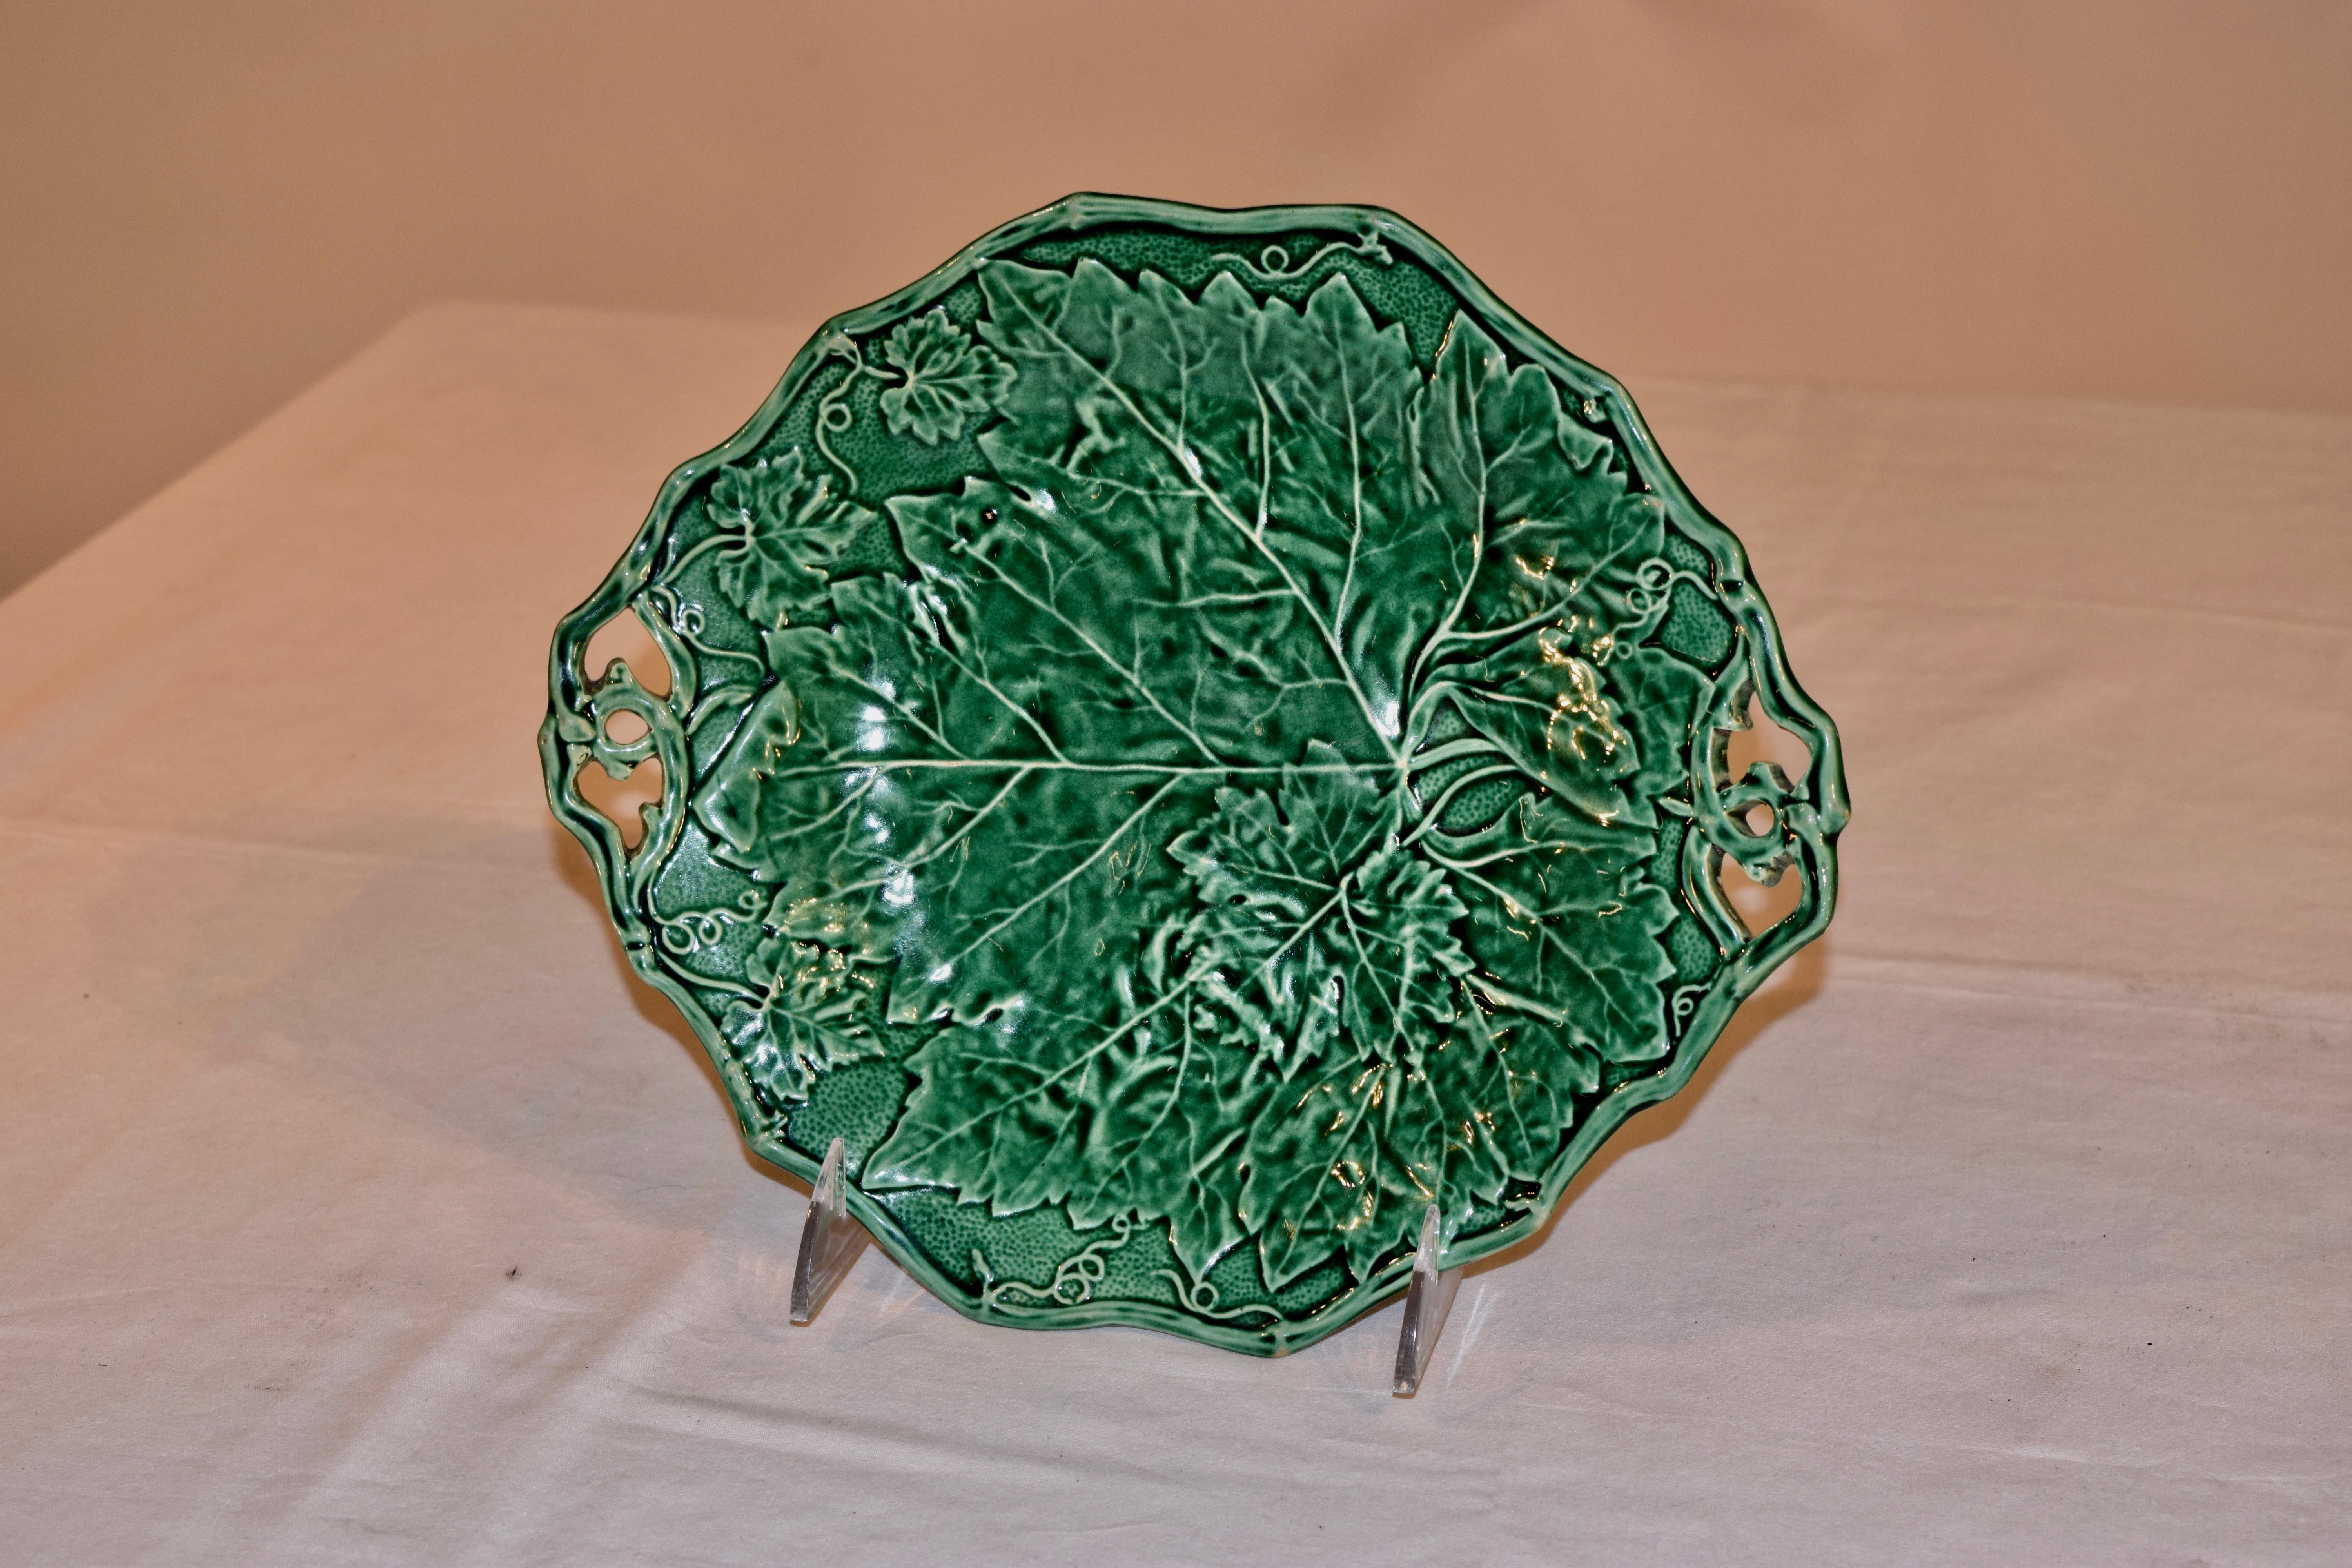 Davenport double handled Majolica dish with Davenport impressed mark and the year for 1852 stamped on the back. Gorgeous pattern with leaves and vines.